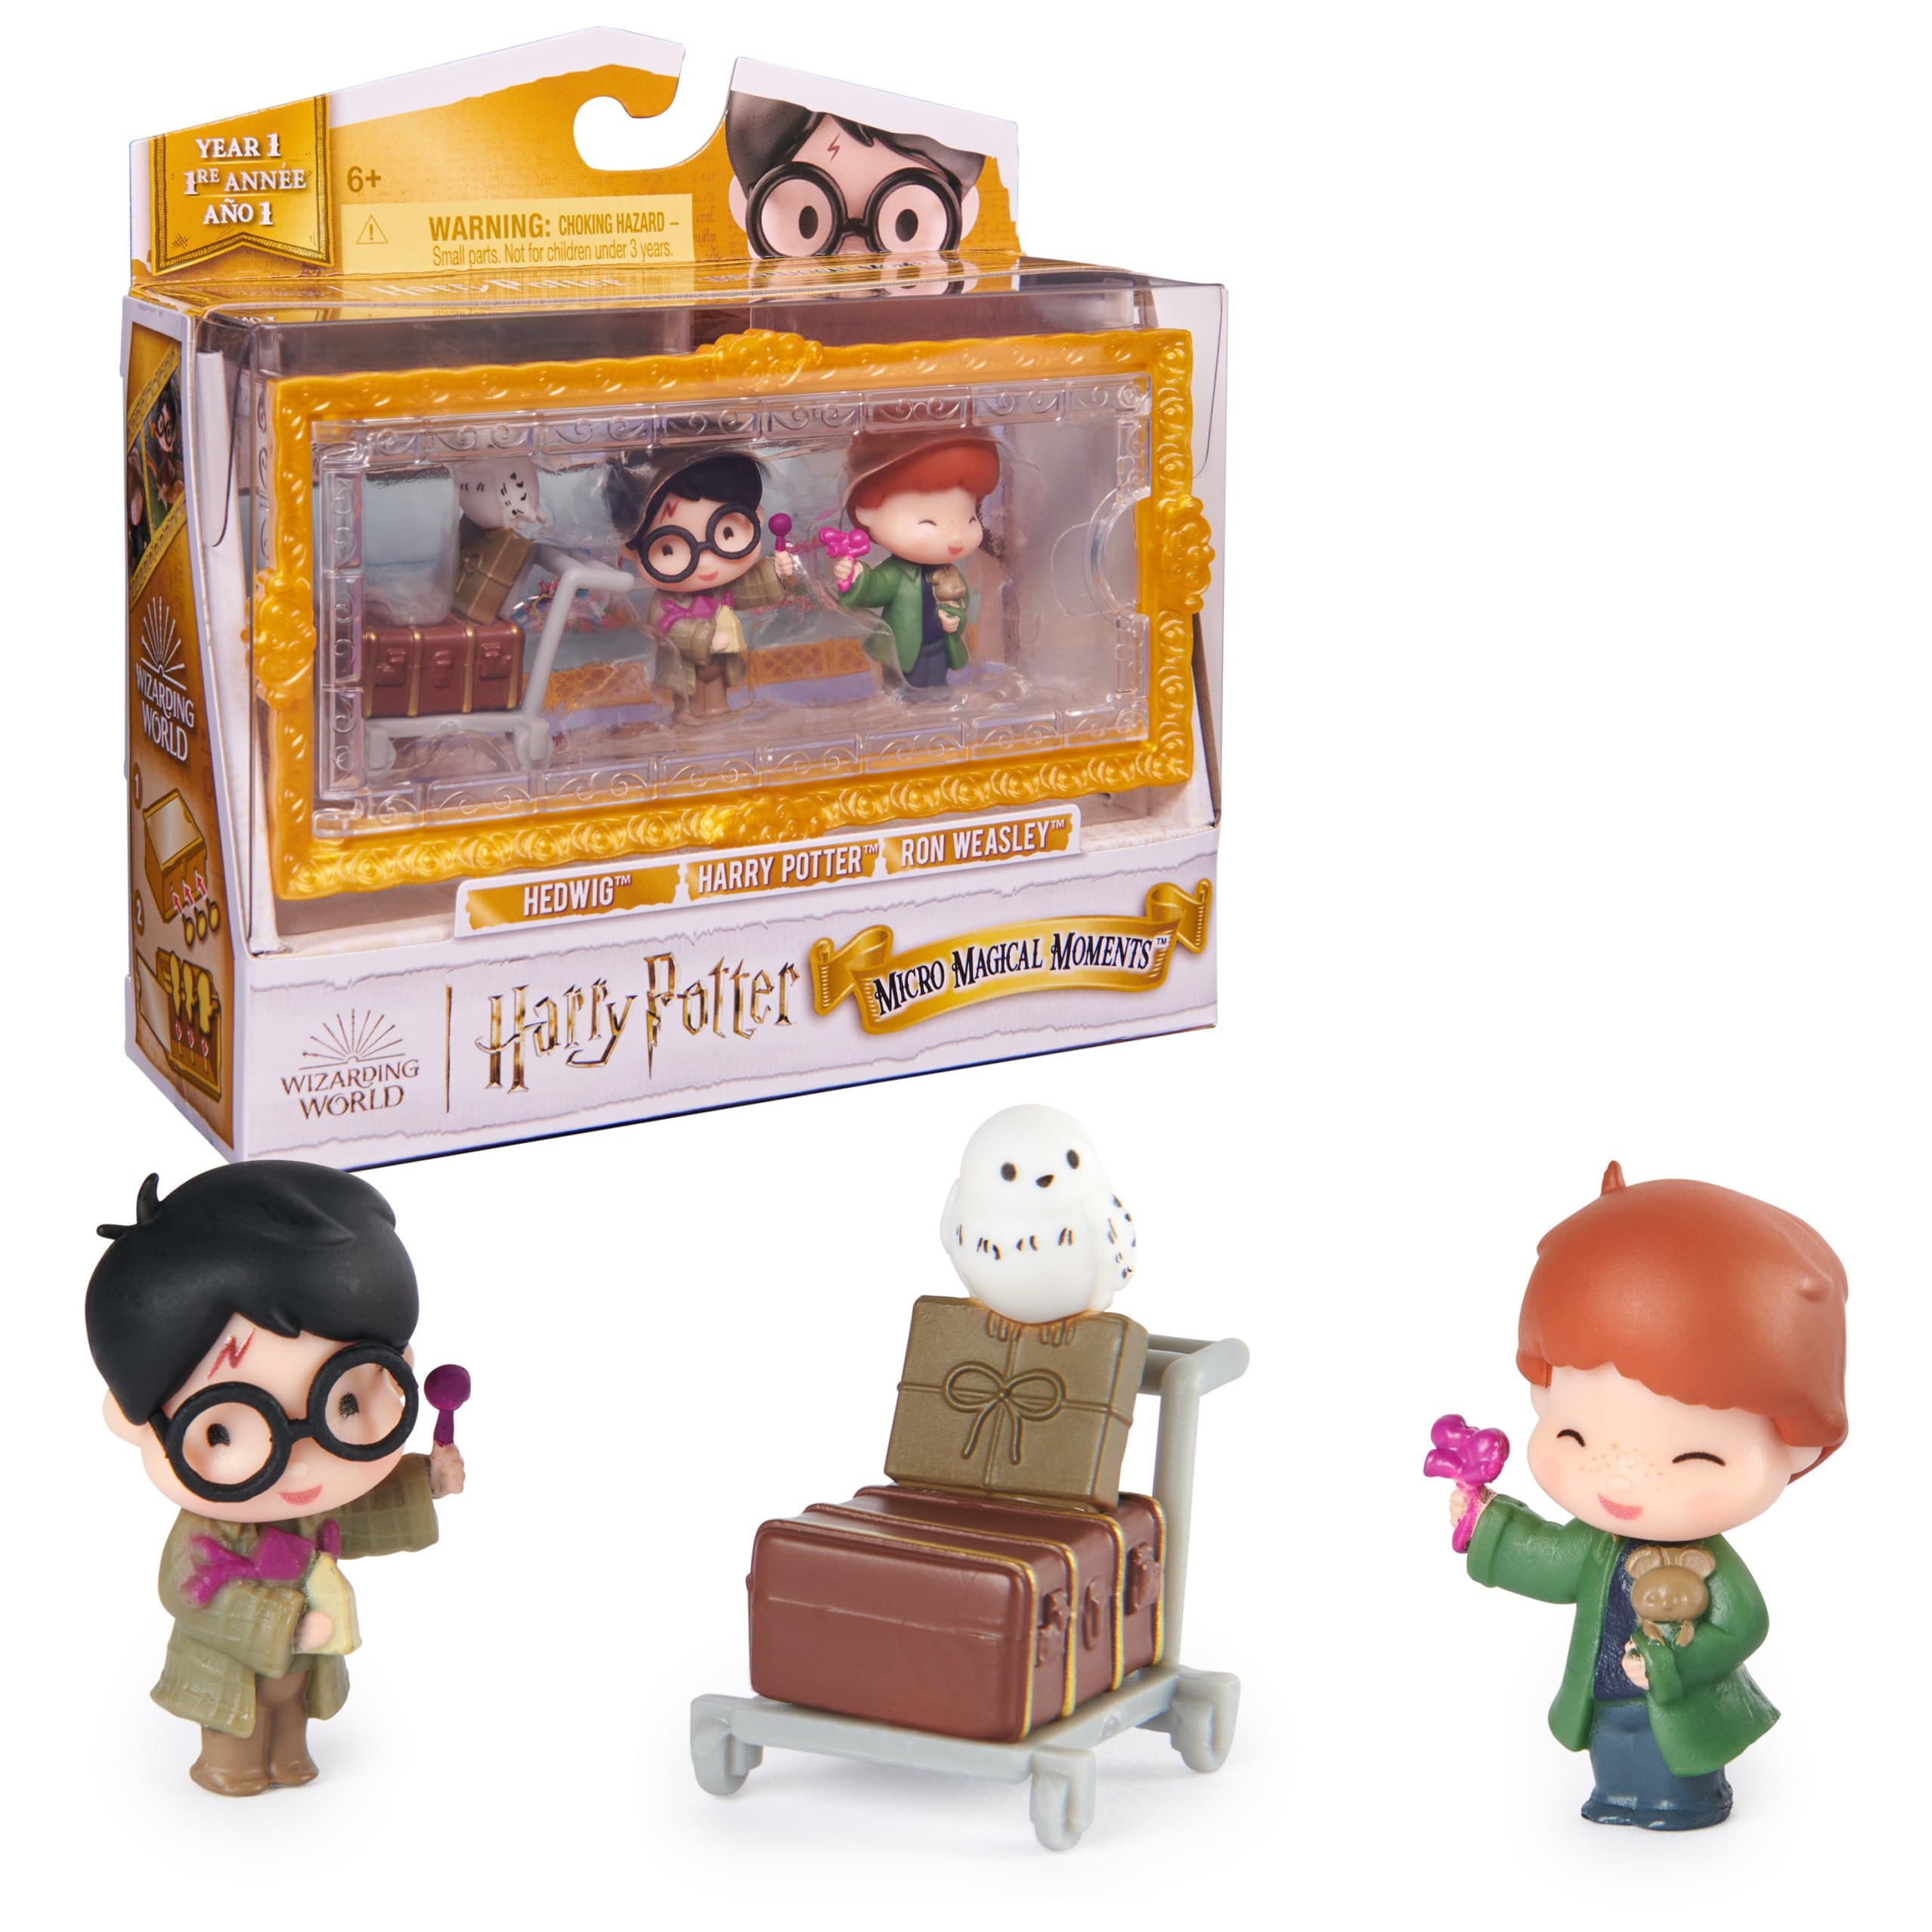 3-Piece 1.5" Wizarding World Harry Potter Micro Magical Moments Figures Set w/ Accessories and Display Case $3.80 + Free Shipping w/ Prime or on 35+